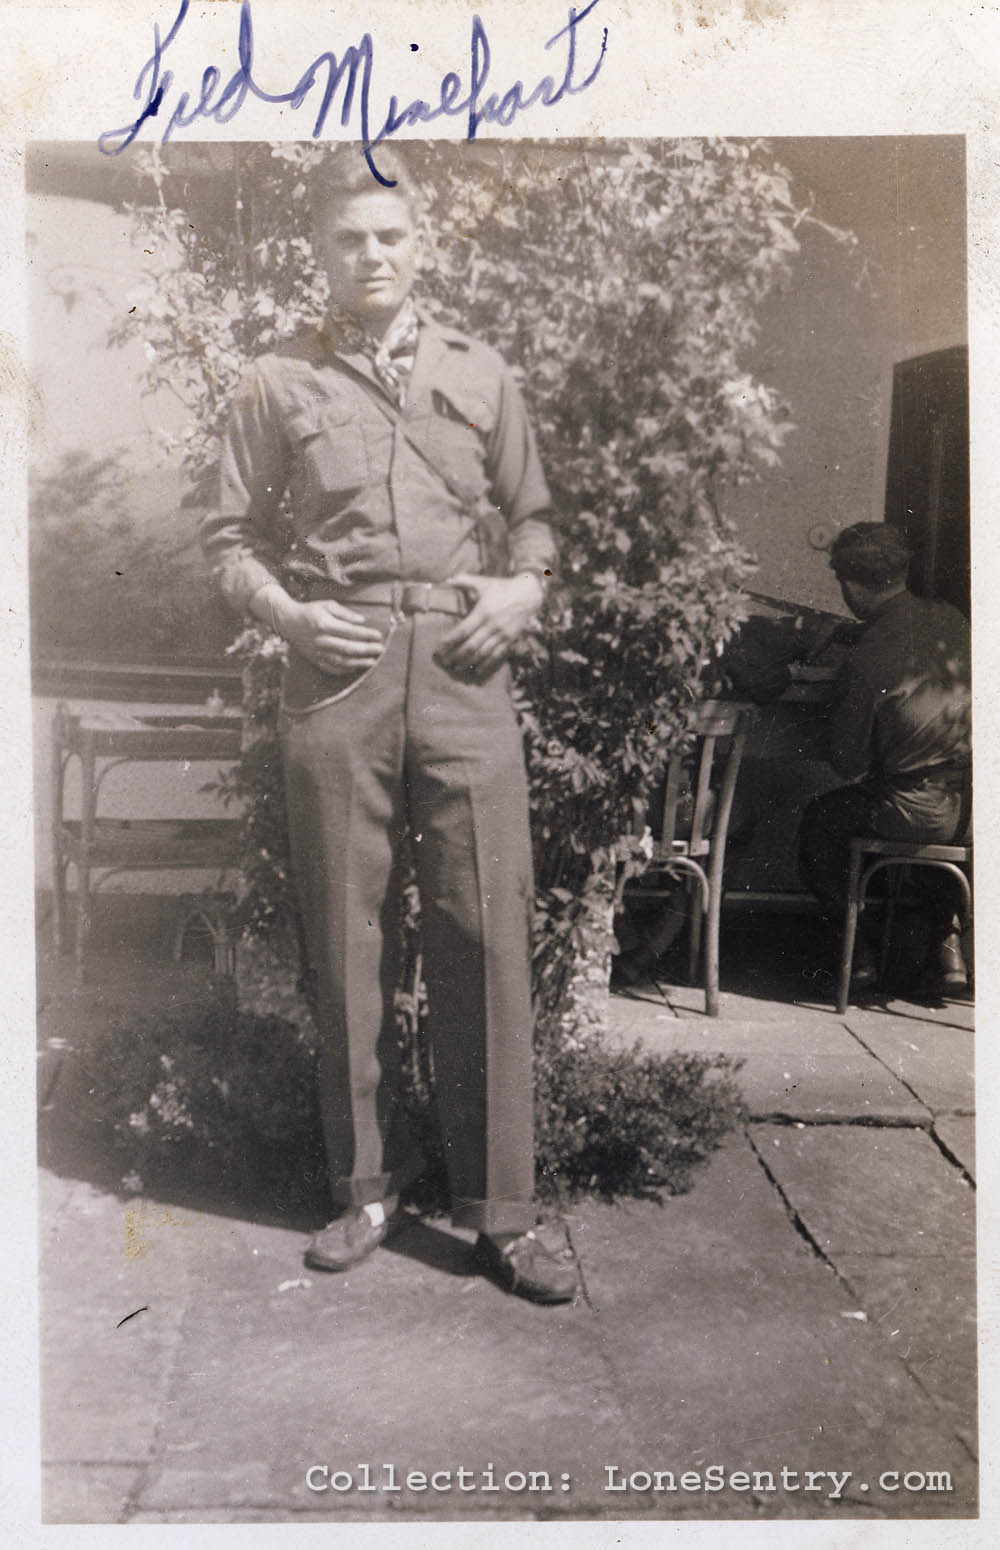 Additional photograph of Fred Minehart of the 995th Field Artillery Battalion. (Collection LoneSentry.com)